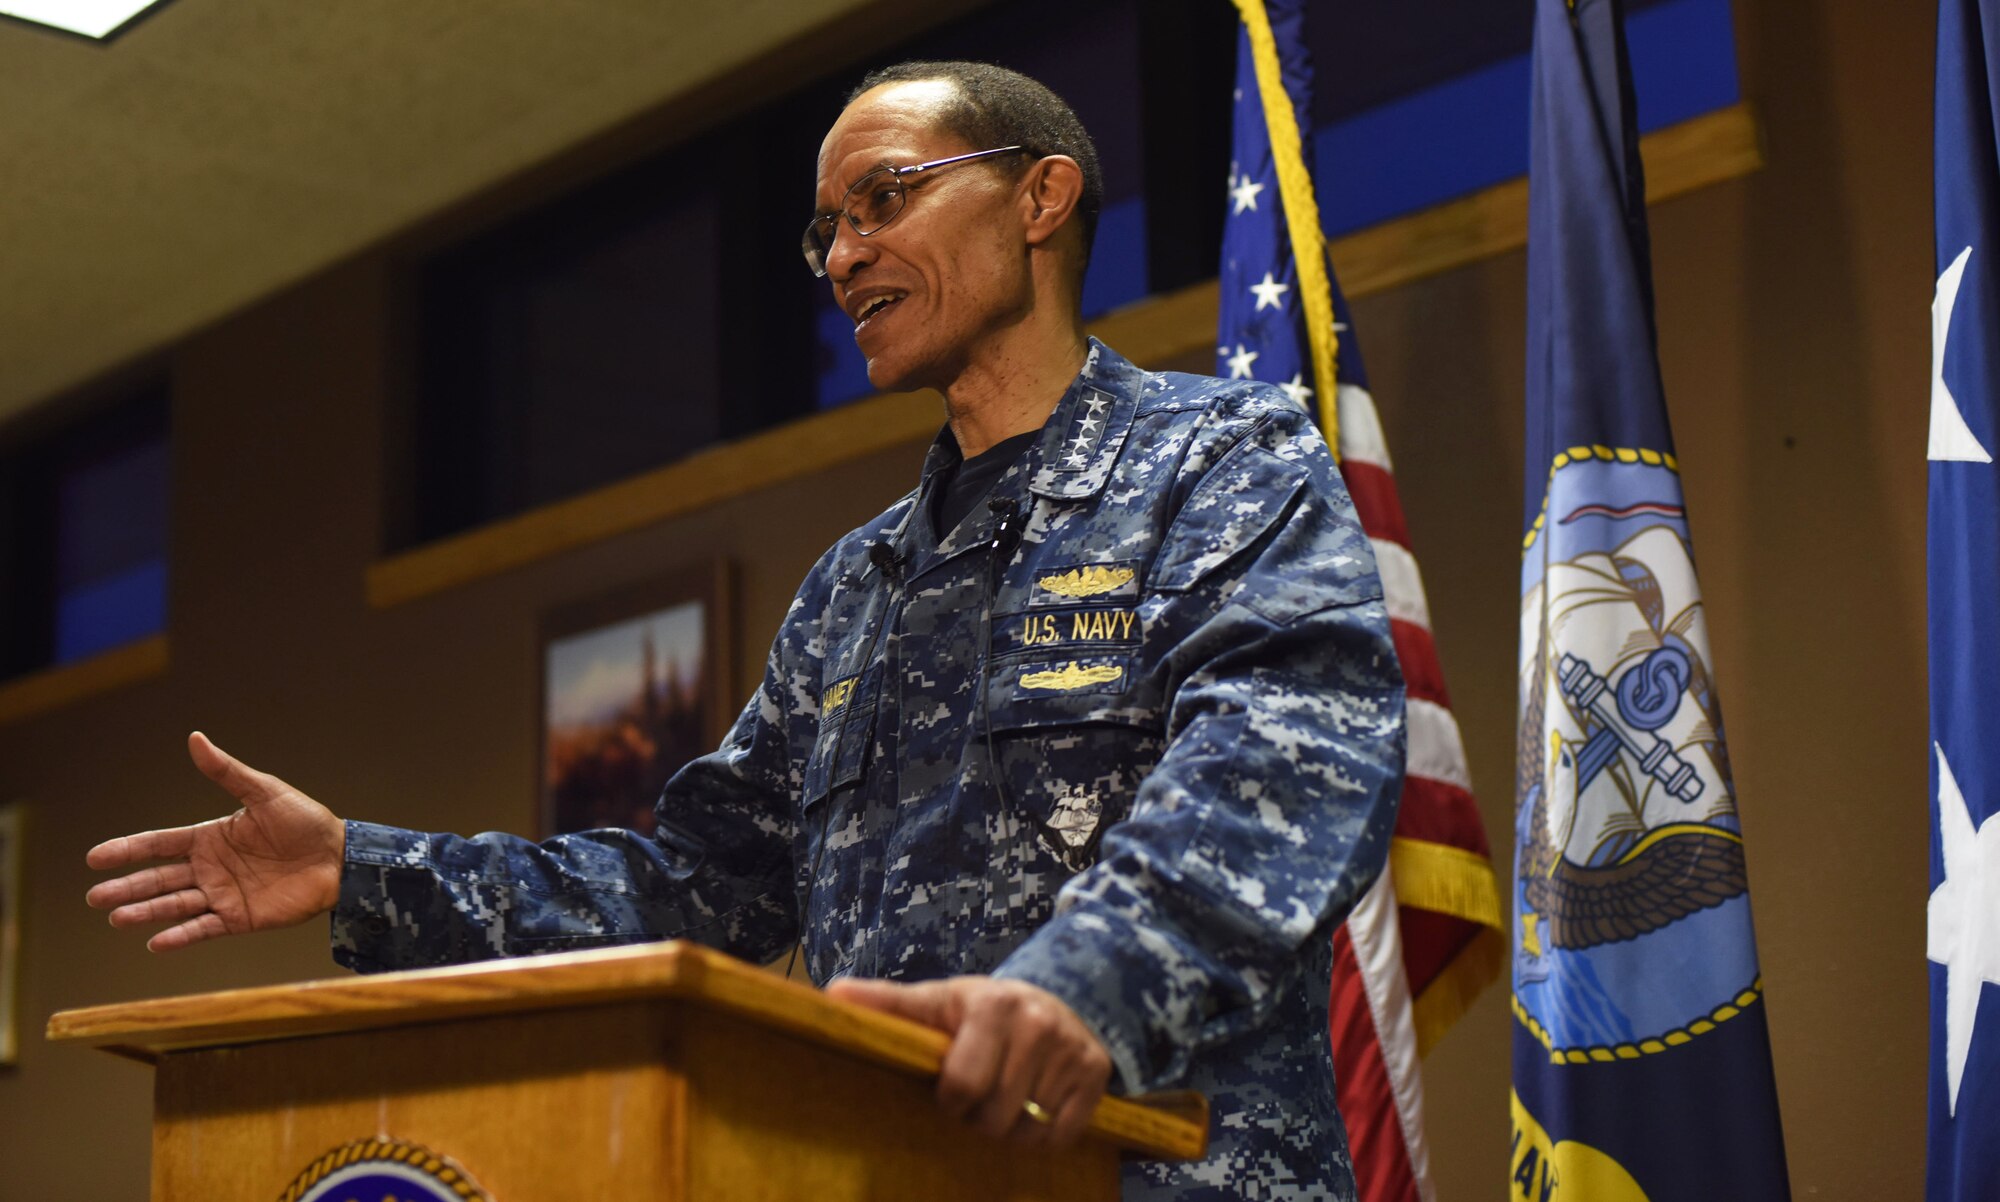 Navy Adm. Cecil D. Haney, the commander of U.S. Strategic Command, addresses local media at Malmstrom Air Force Base, Mont., Jan. 14, 2016. During his visit there, Haney had breakfast with Airmen and leaders; toured the security forces, missile maintenance and other facilities; and discussed STRATCOM’s mission areas and priorities and Malmstrom’s role in deterrence and assurance with Malmstrom personnel. STRATCOM has global strategic missions that include strategic deterrence; space operations; cyberspace operations; joint electronic warfare; global strike; missile defense; intelligence, surveillance and reconnaissance; combating weapons of mass destruction; and analysis and targeting. (U.S. Air Force photo/Airman Collin Schmidt)